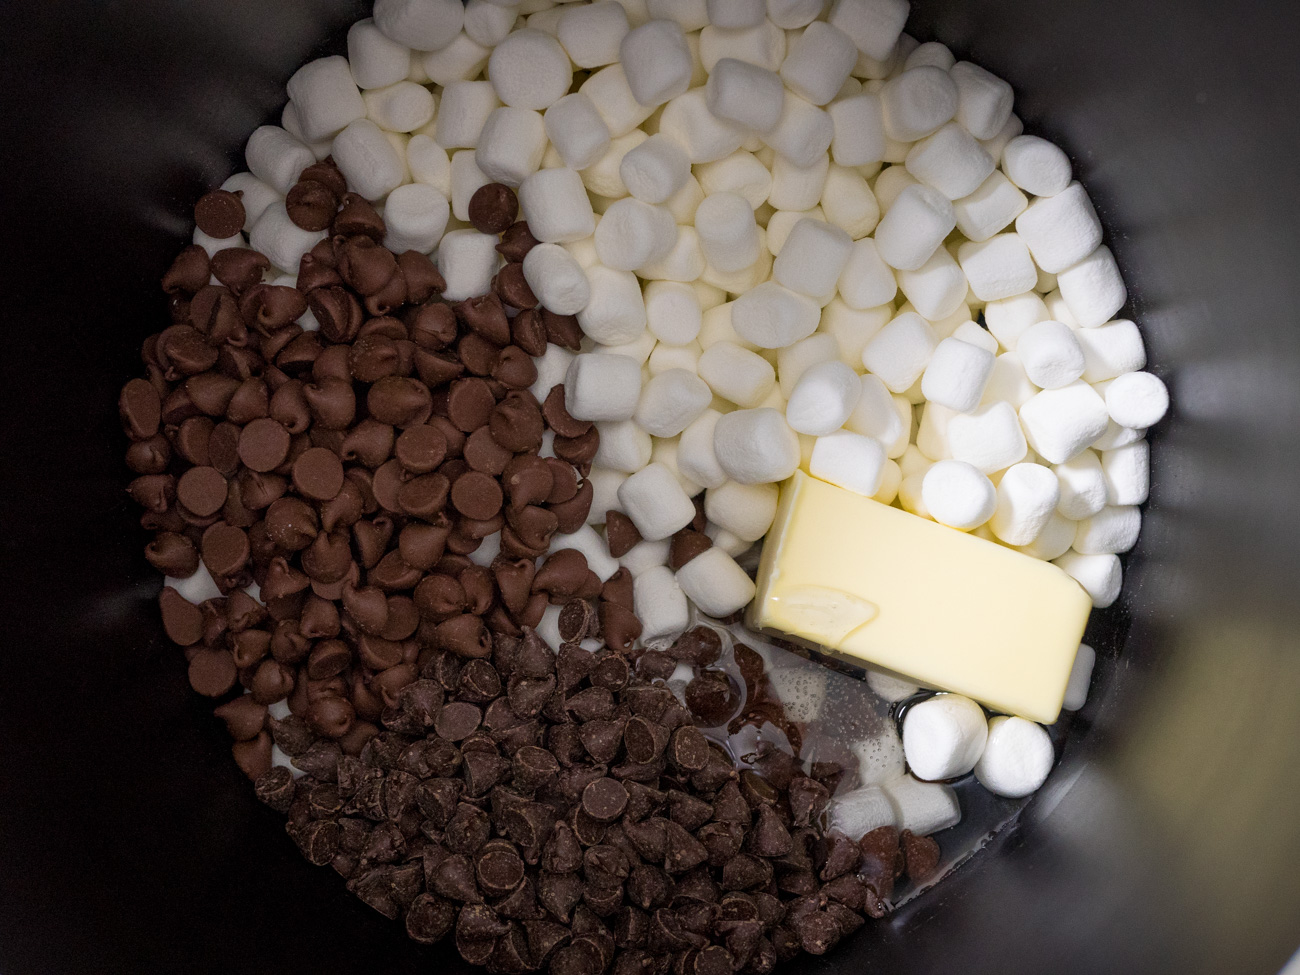 In a large saucepan, mix 4 cups of marshmallows, both kinds of chocolate chips, butter, and corn syrup. Stir mixture over medium heat until melted.